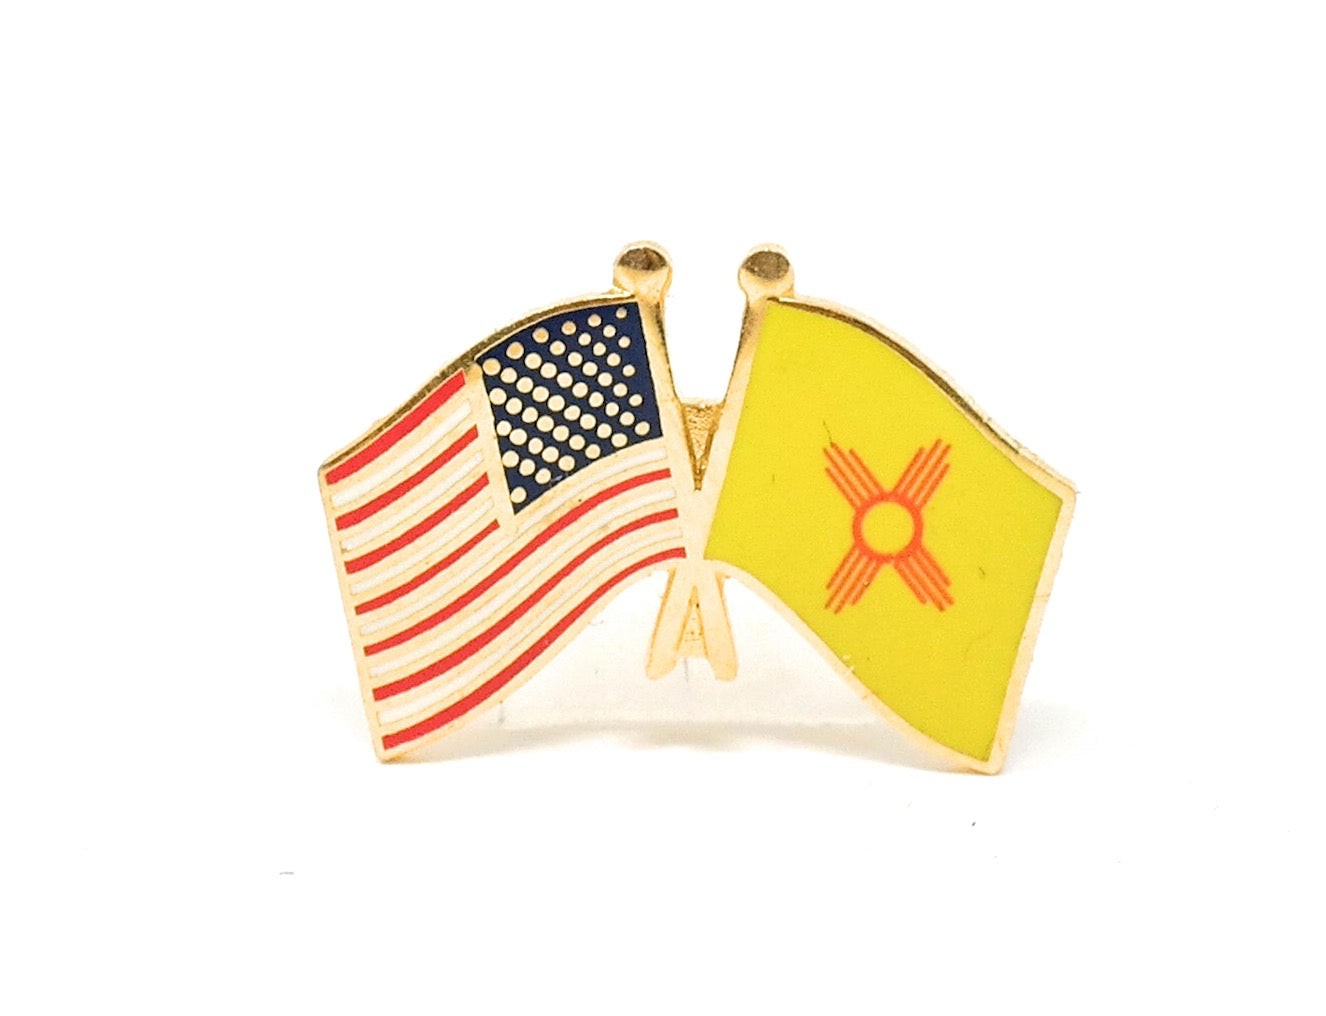 New Mexico State & USA Friendship Flag Lapel Pin